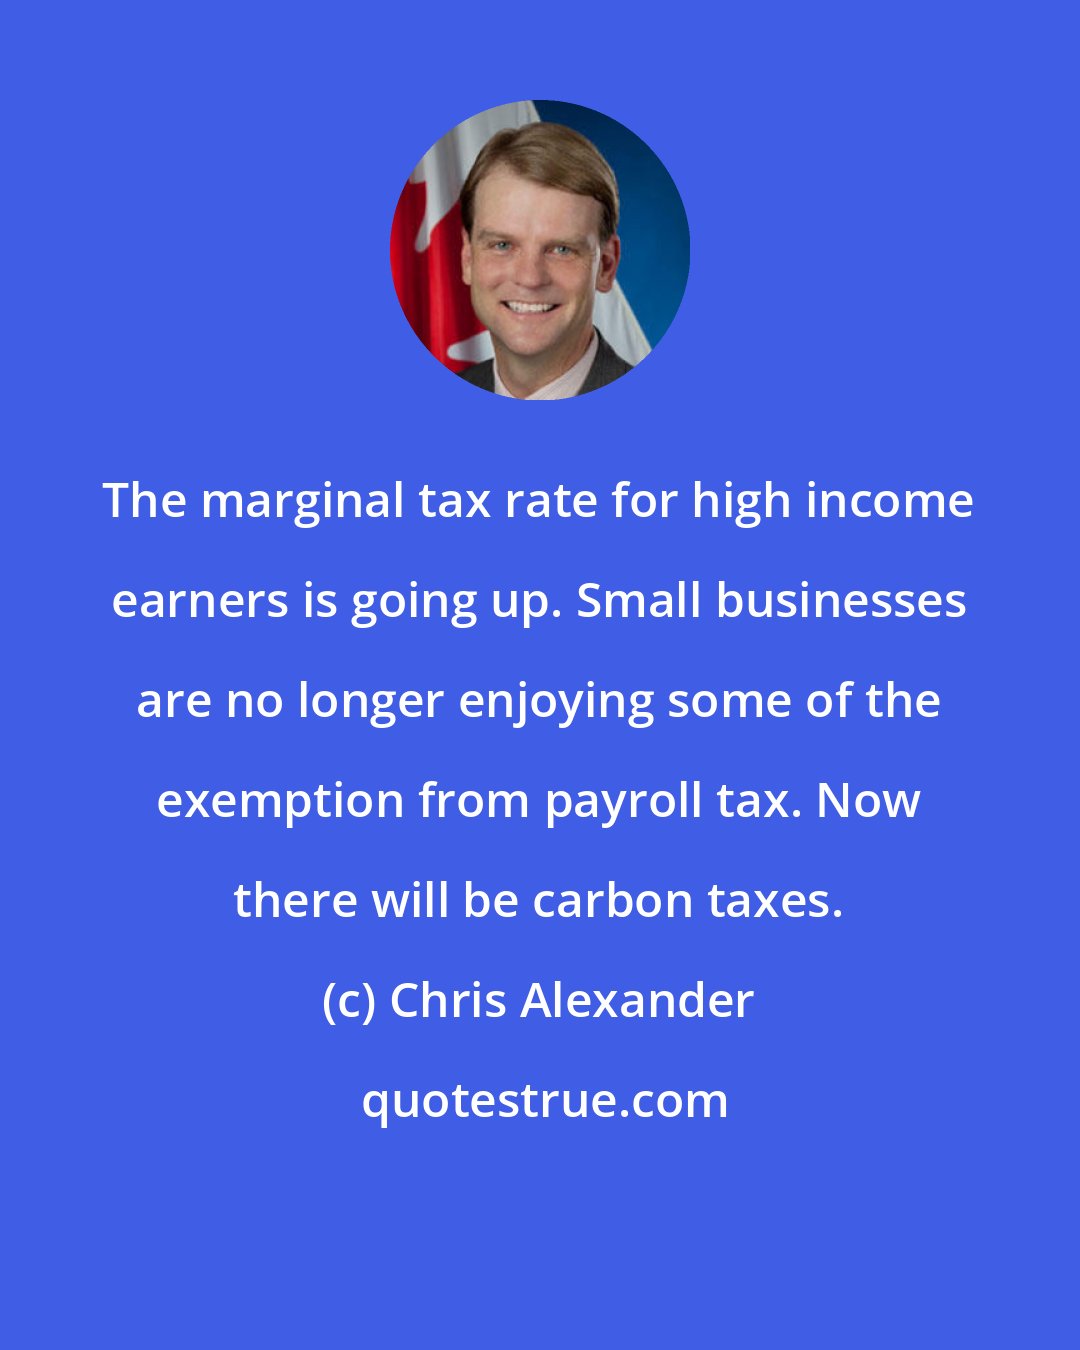 Chris Alexander: The marginal tax rate for high income earners is going up. Small businesses are no longer enjoying some of the exemption from payroll tax. Now there will be carbon taxes.